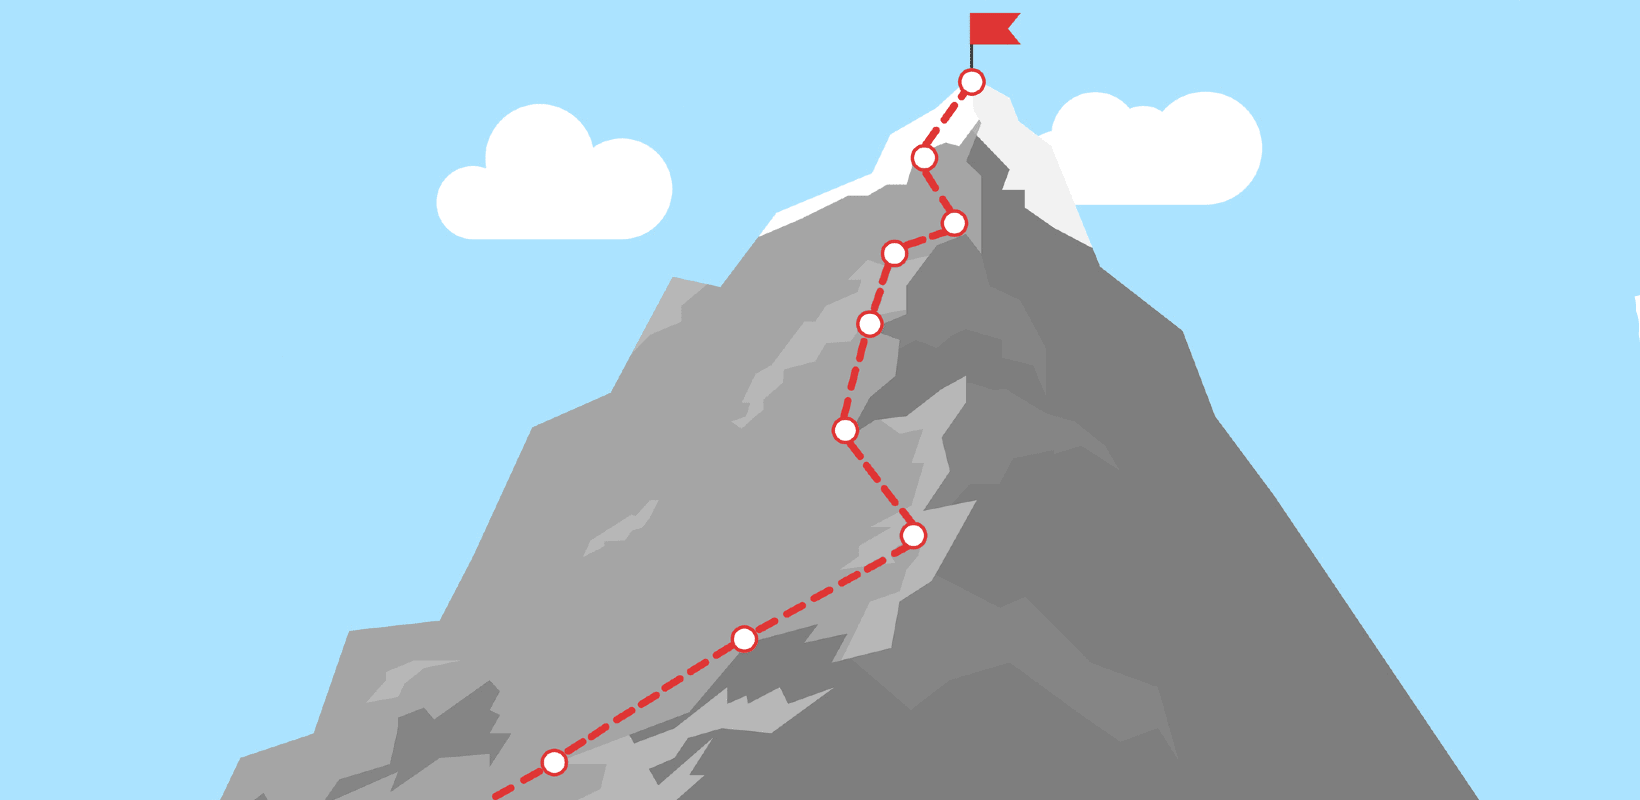 Illustration of a mountain with a flag planted at the top.